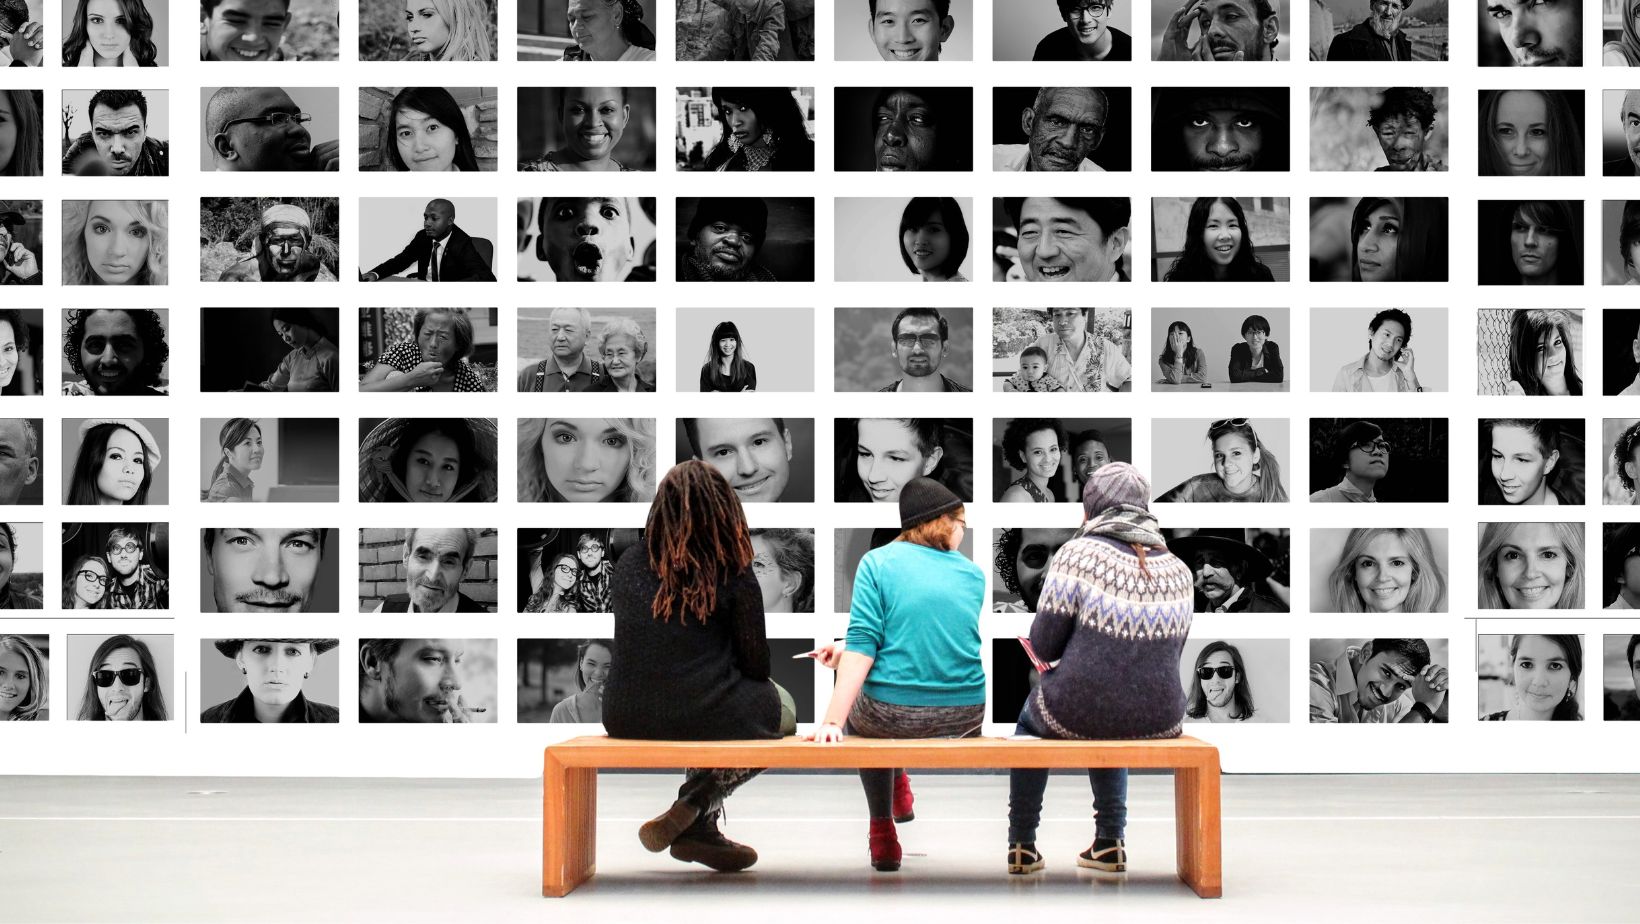 Three people are sitting on a bench facing away from the viewer, observing a wall collage of pictures. The pictures feature individuals of various ages and backgrounds, showcasing diversity. The images are in black and white, except for the bench and the three individuals sitting on it. The scene resembles people observing artwork at a museum.